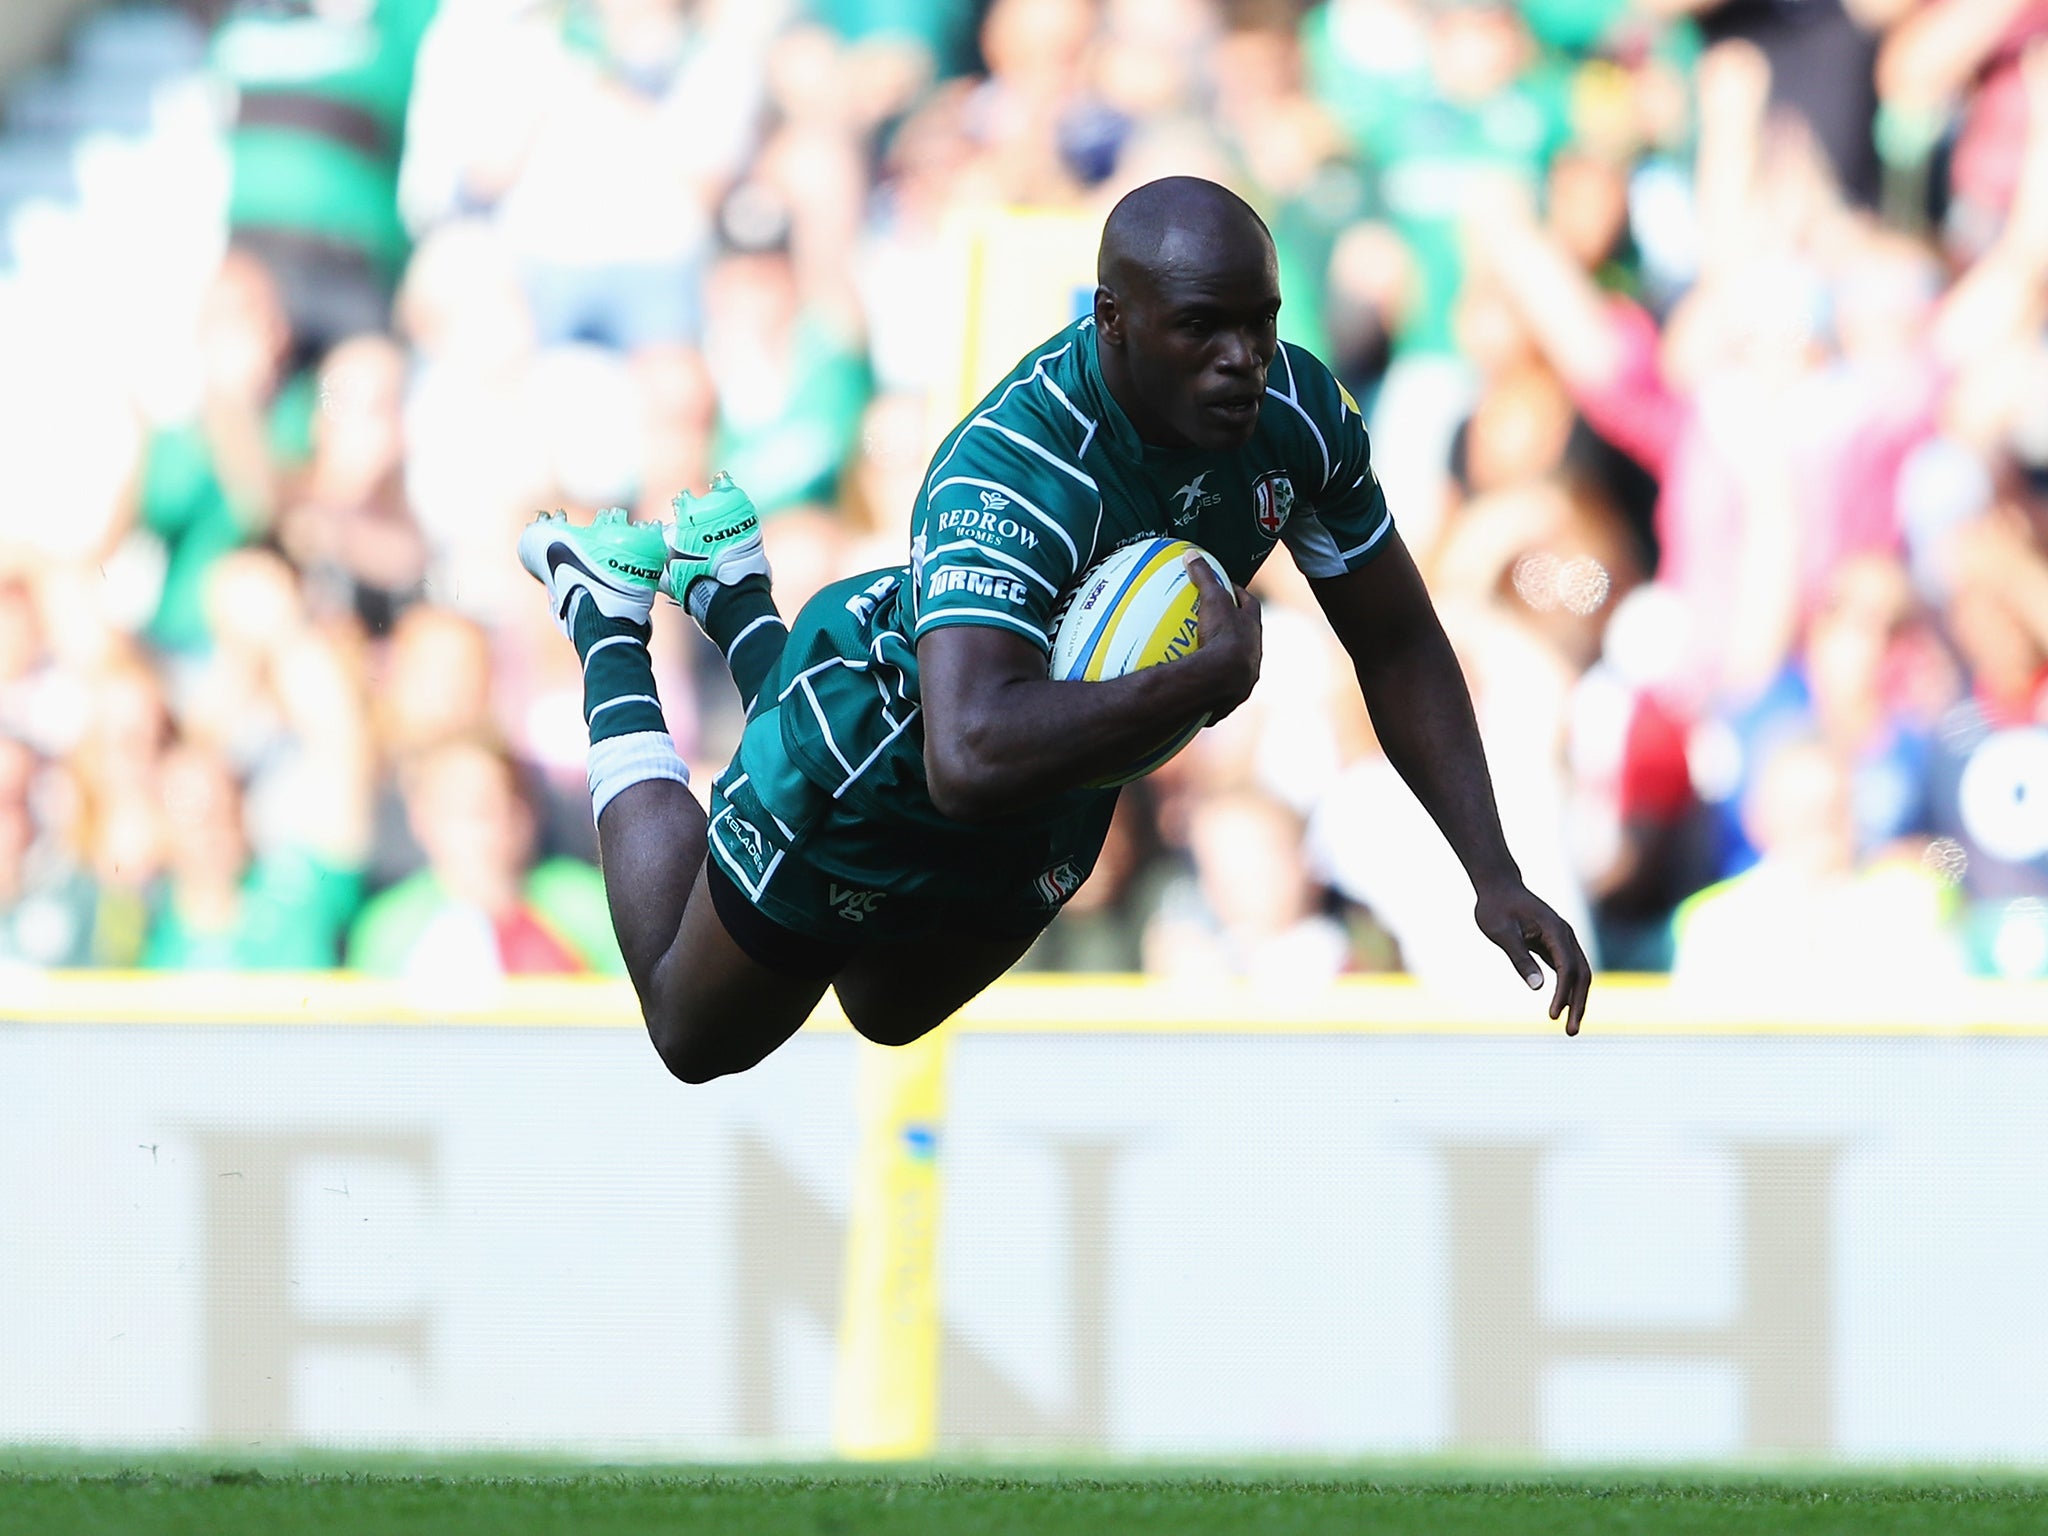 Topsy Ojo scored the opening try as London Irish beat Harlequins 39-29 on their return to the Premiership